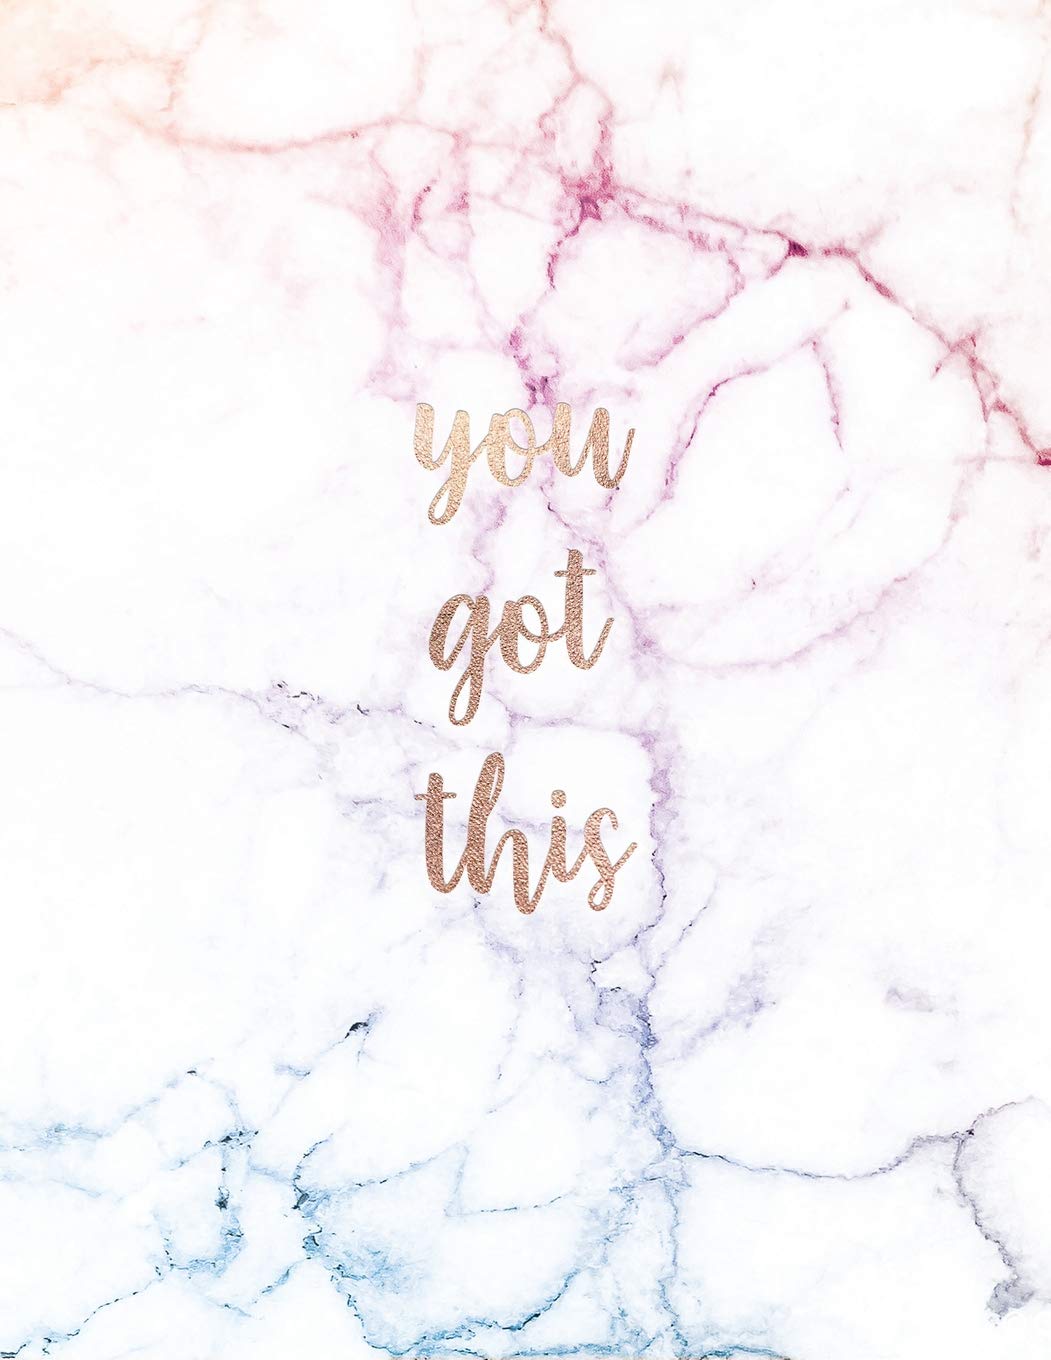 Rose Gold Quotes Wallpapers Top Free Rose Gold Quotes Backgrounds Wallpaperaccess Search free iphone original wallpapers on zedge and personalize your phone to suit you. rose gold quotes wallpapers top free